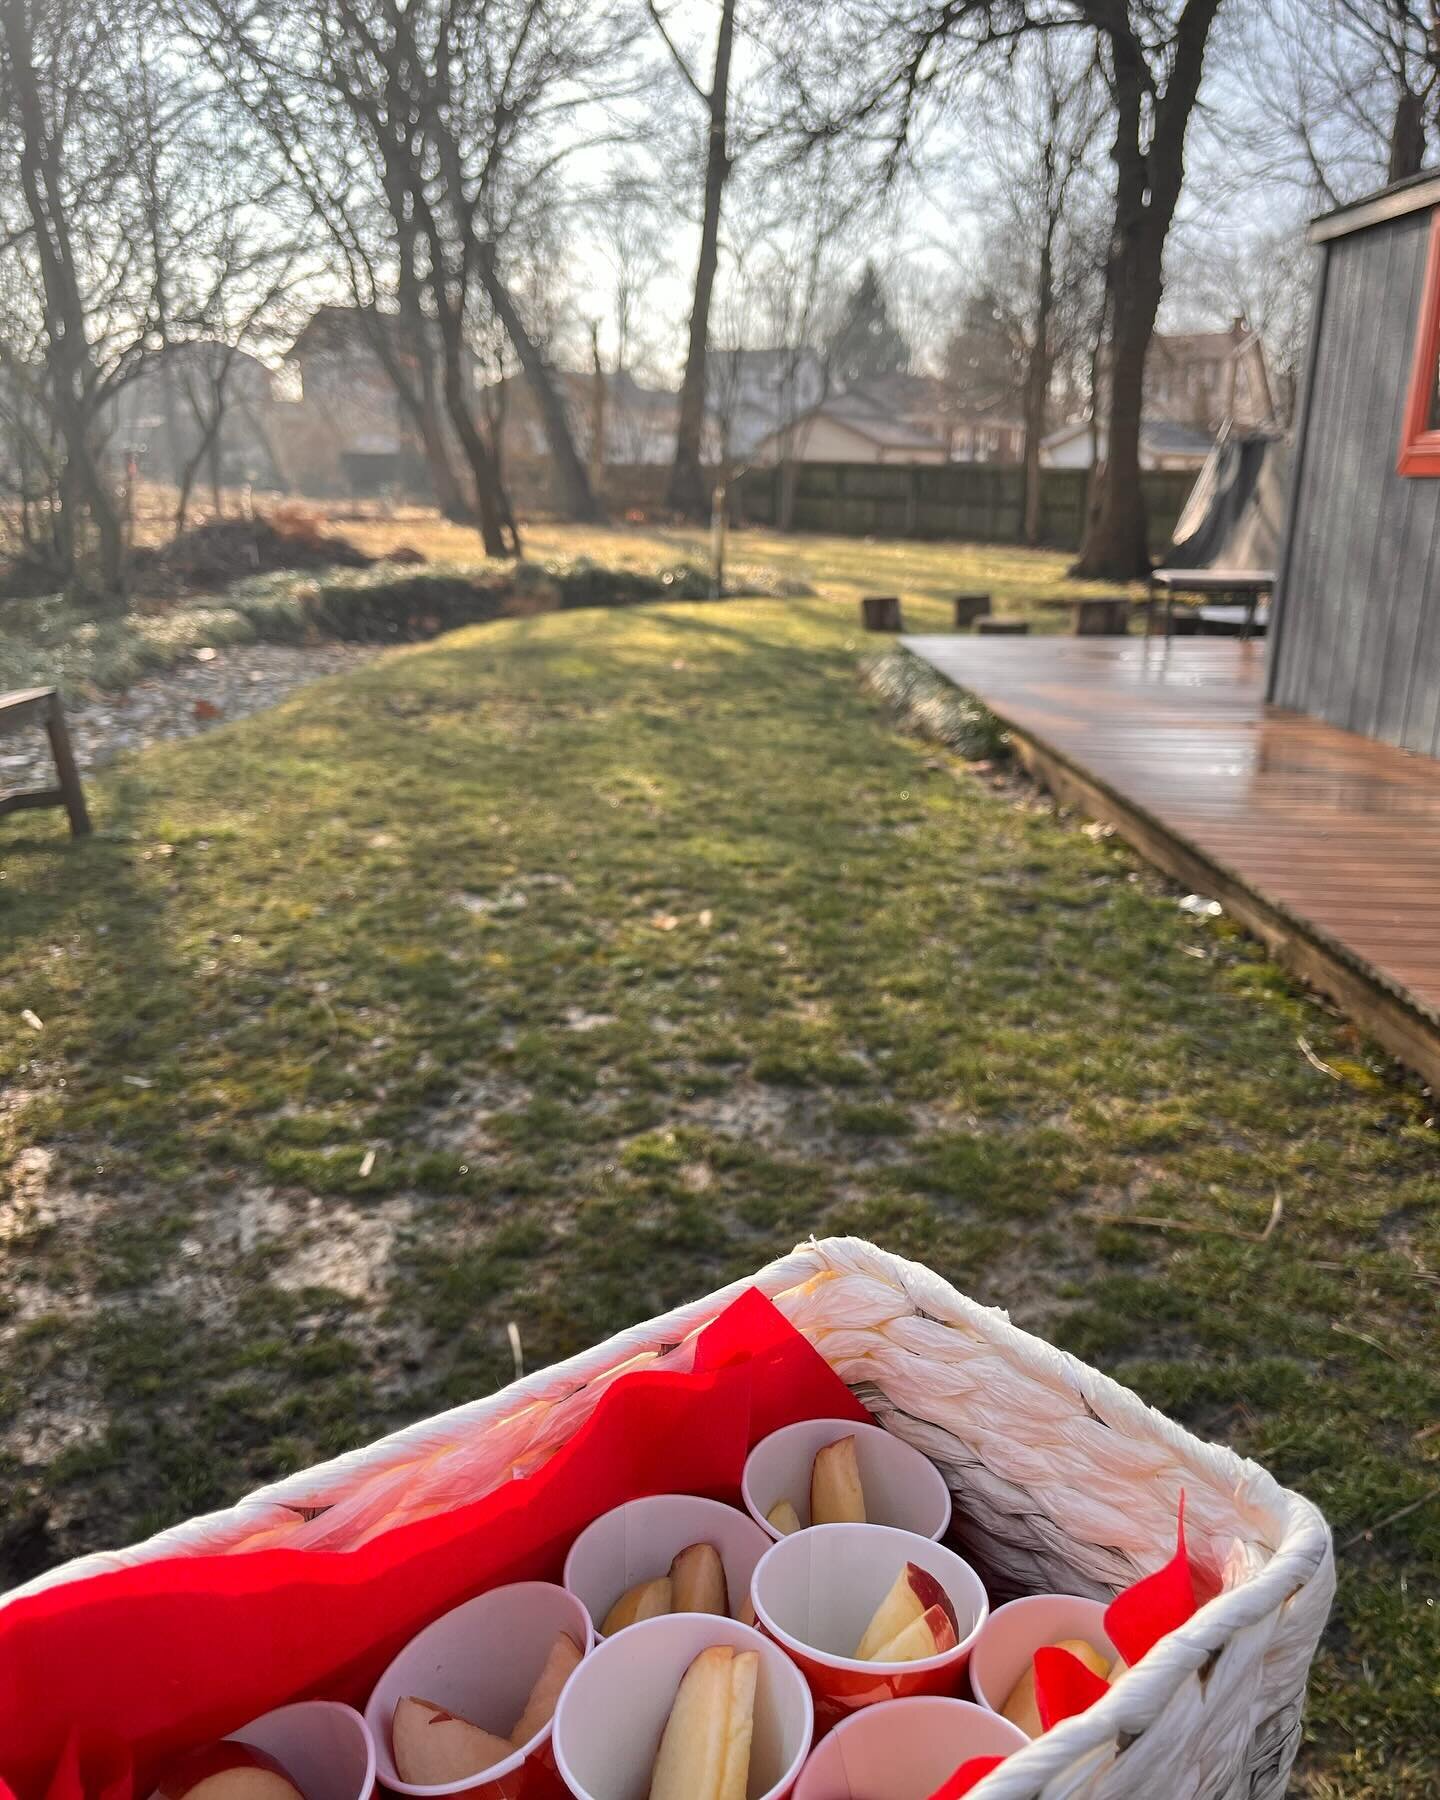 It&rsquo;s a beautiful morning here in Pleasant Ridge and we&rsquo;re learning about maple today, so of course, we have to have a special snack&hellip;. Apples dipped in maple syrup! 🍎 🍁  Come join us! #Carefreefridays 9:30-10:30 6238 Montgomery Rd